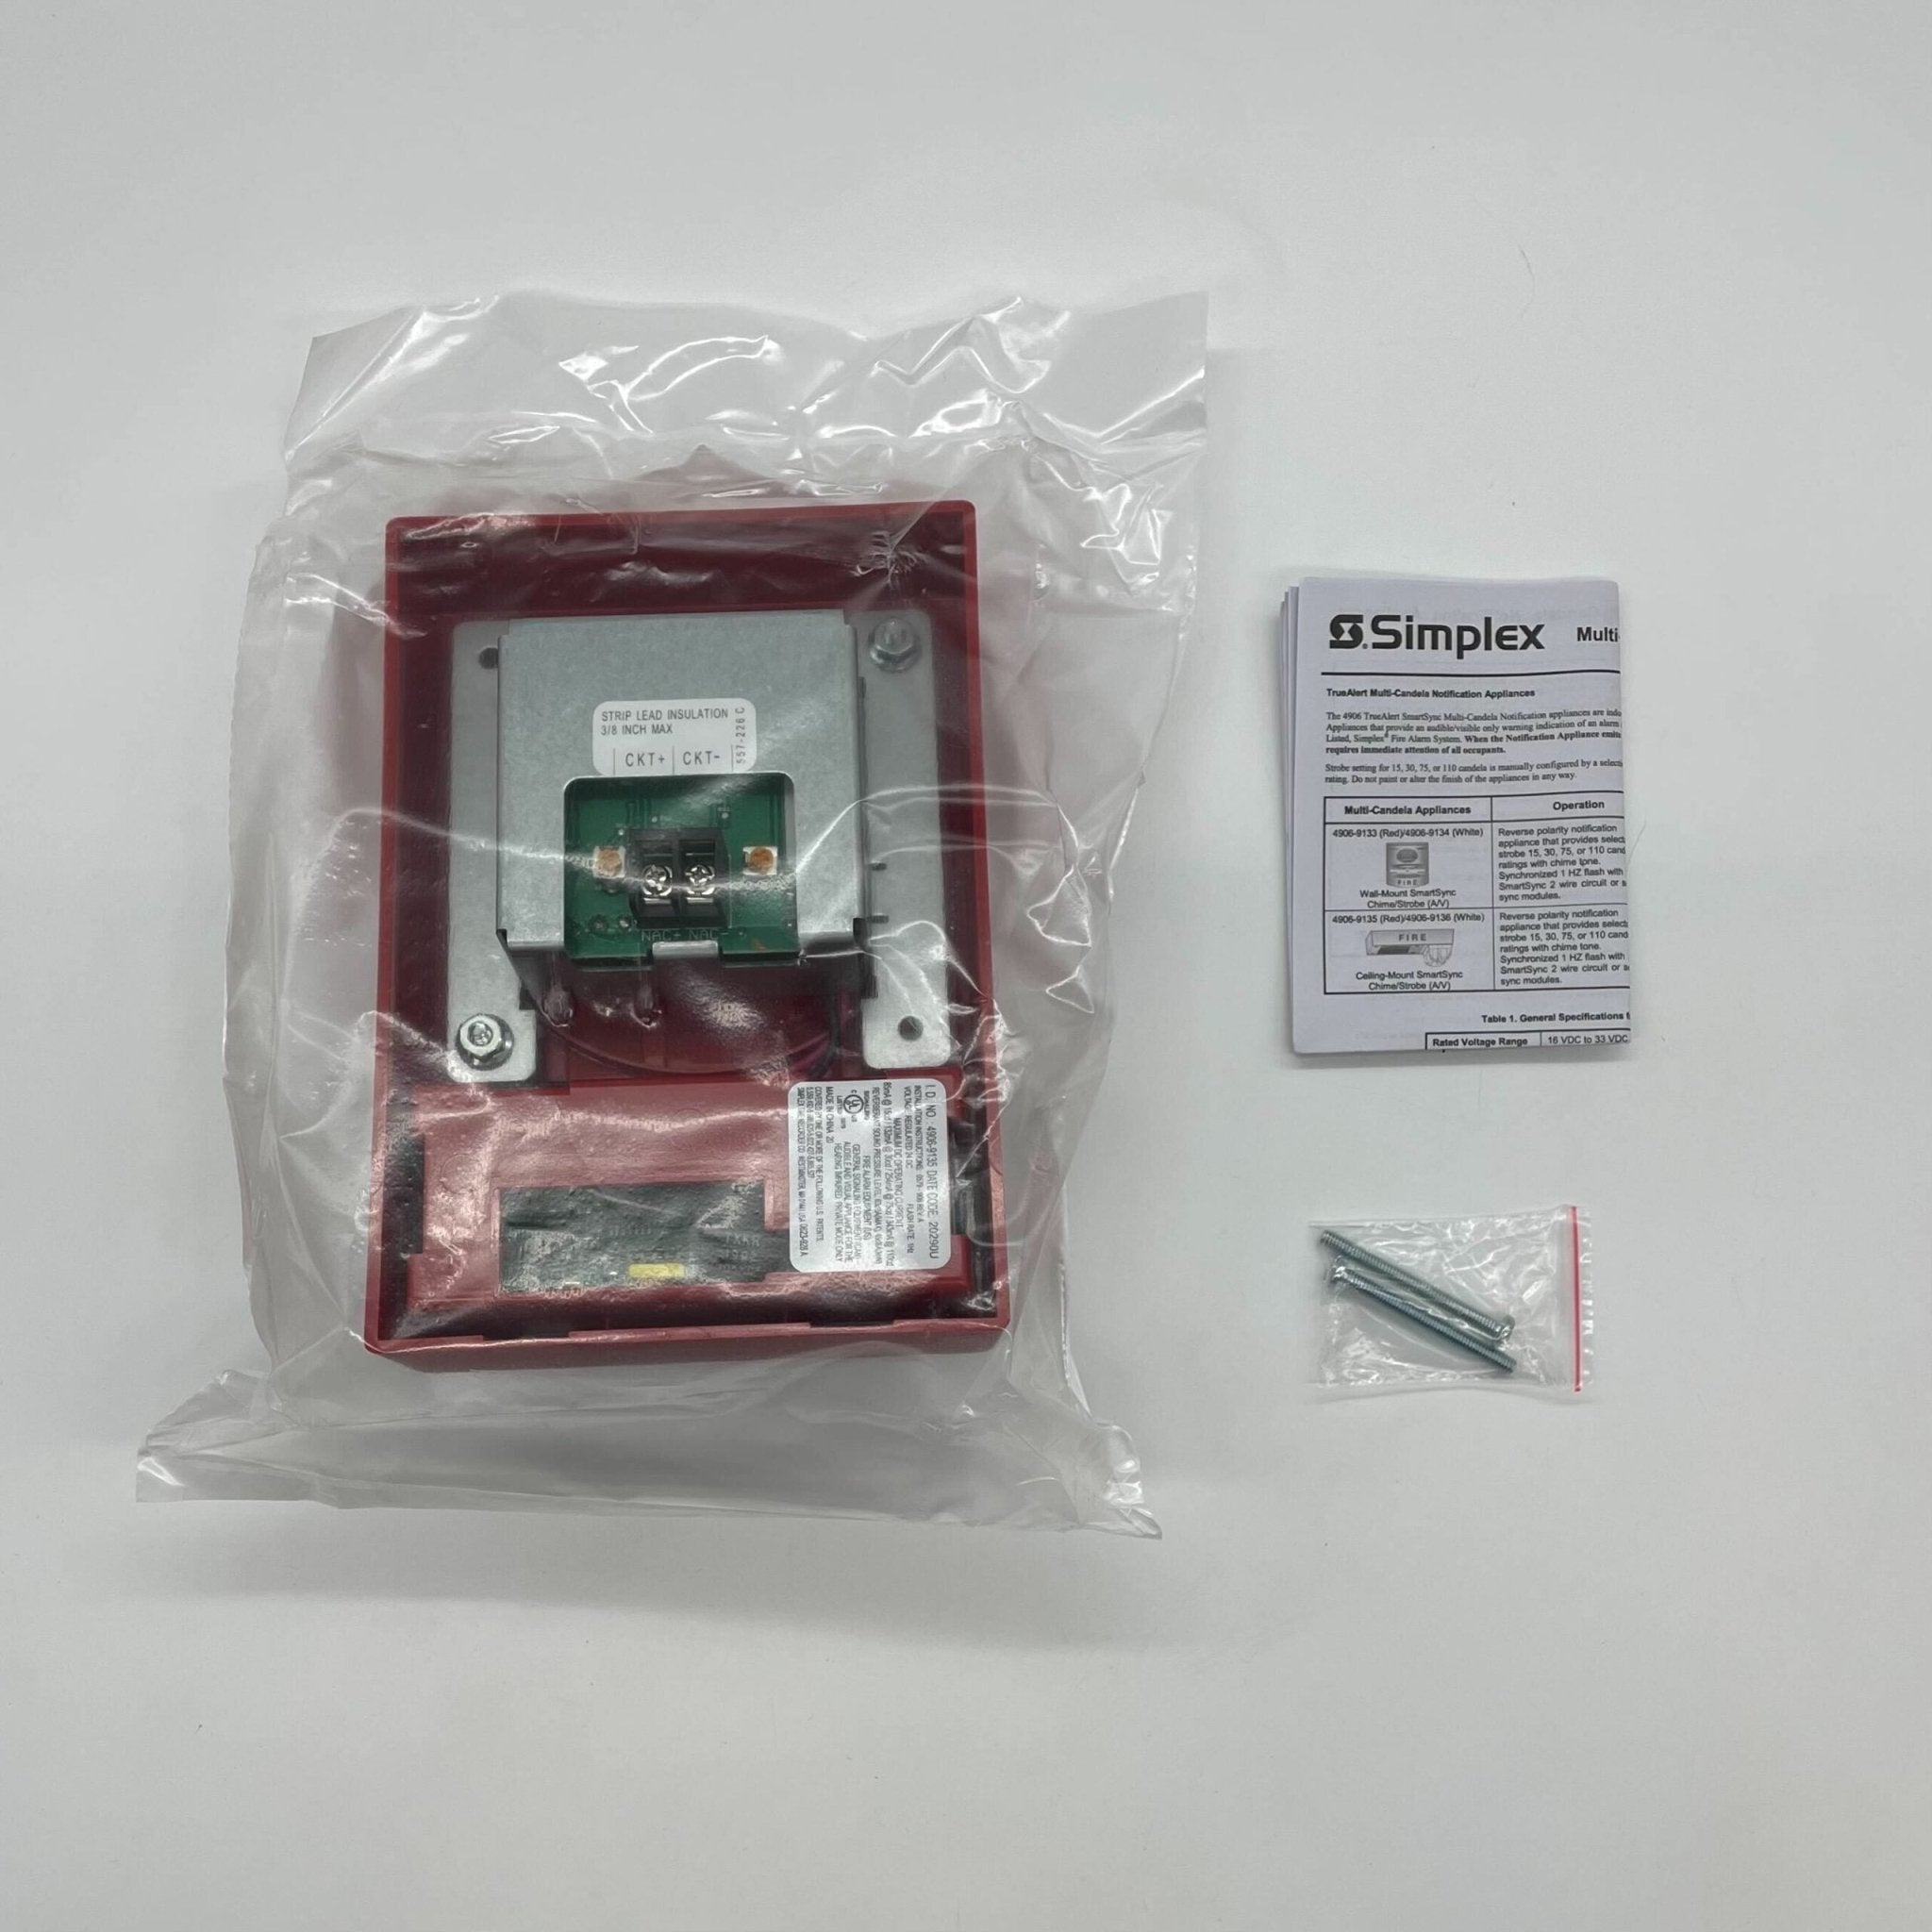 Simplex 4906-9135 Chime/Strobe Ceiling Red - The Fire Alarm Supplier